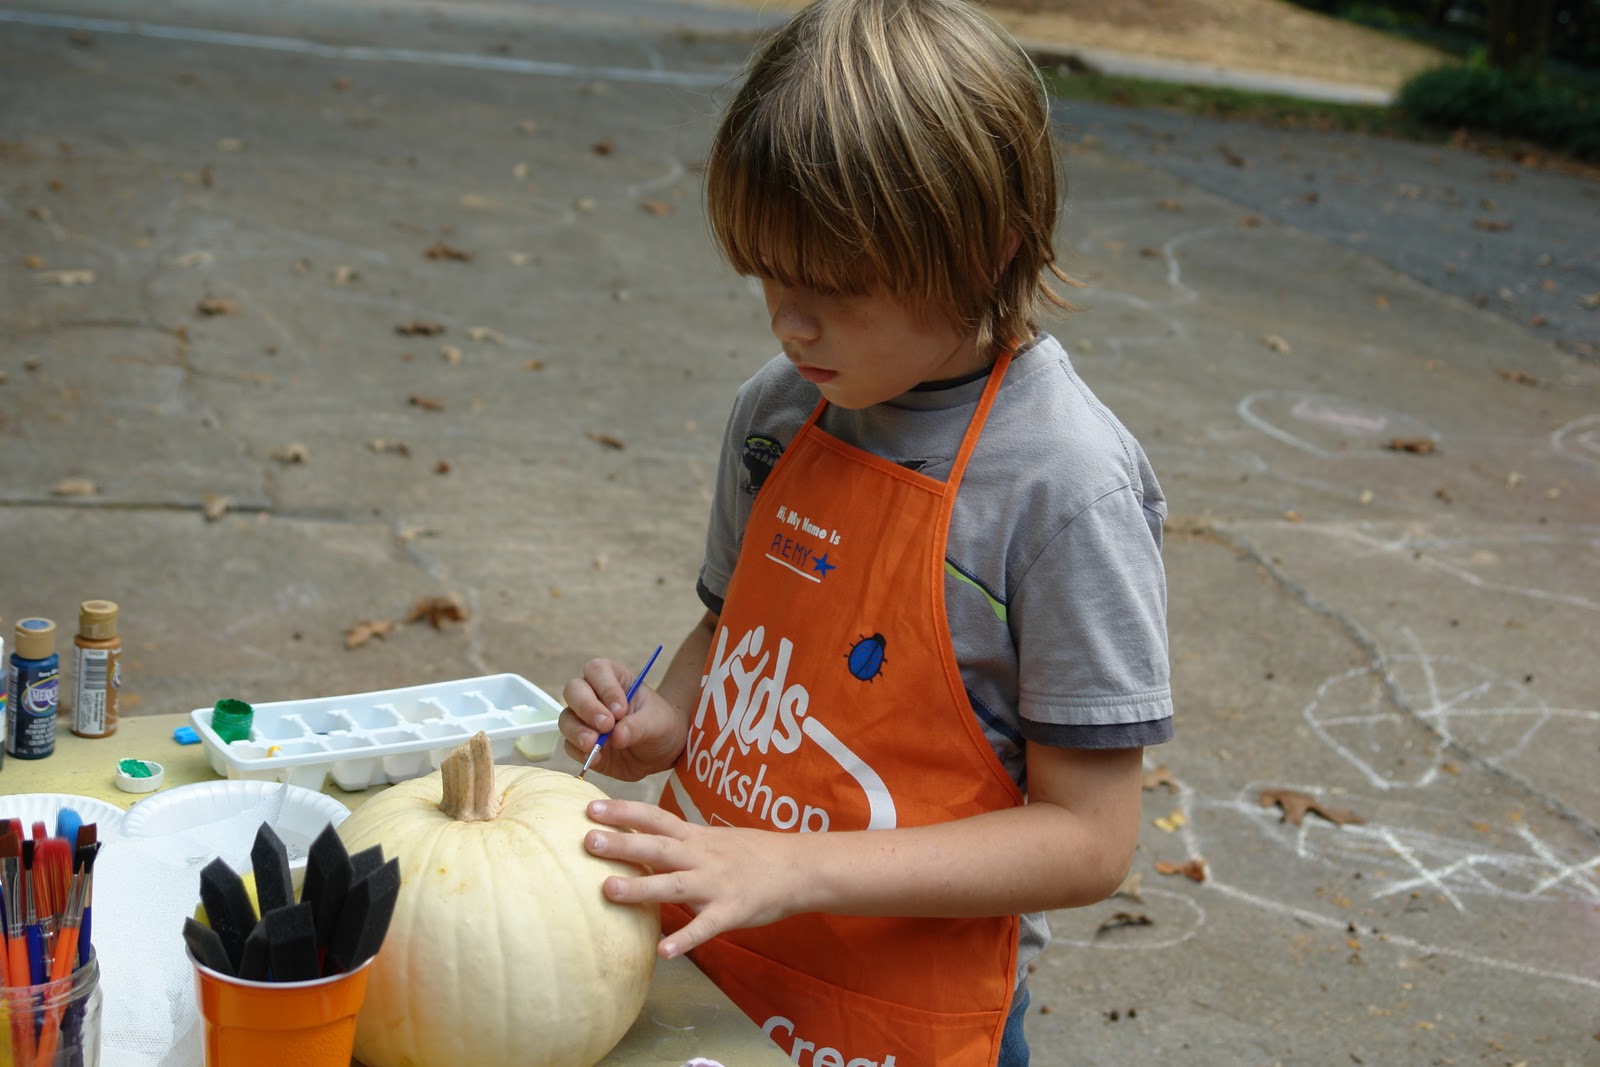 booturtle's show and tell: Painting Pumpkins